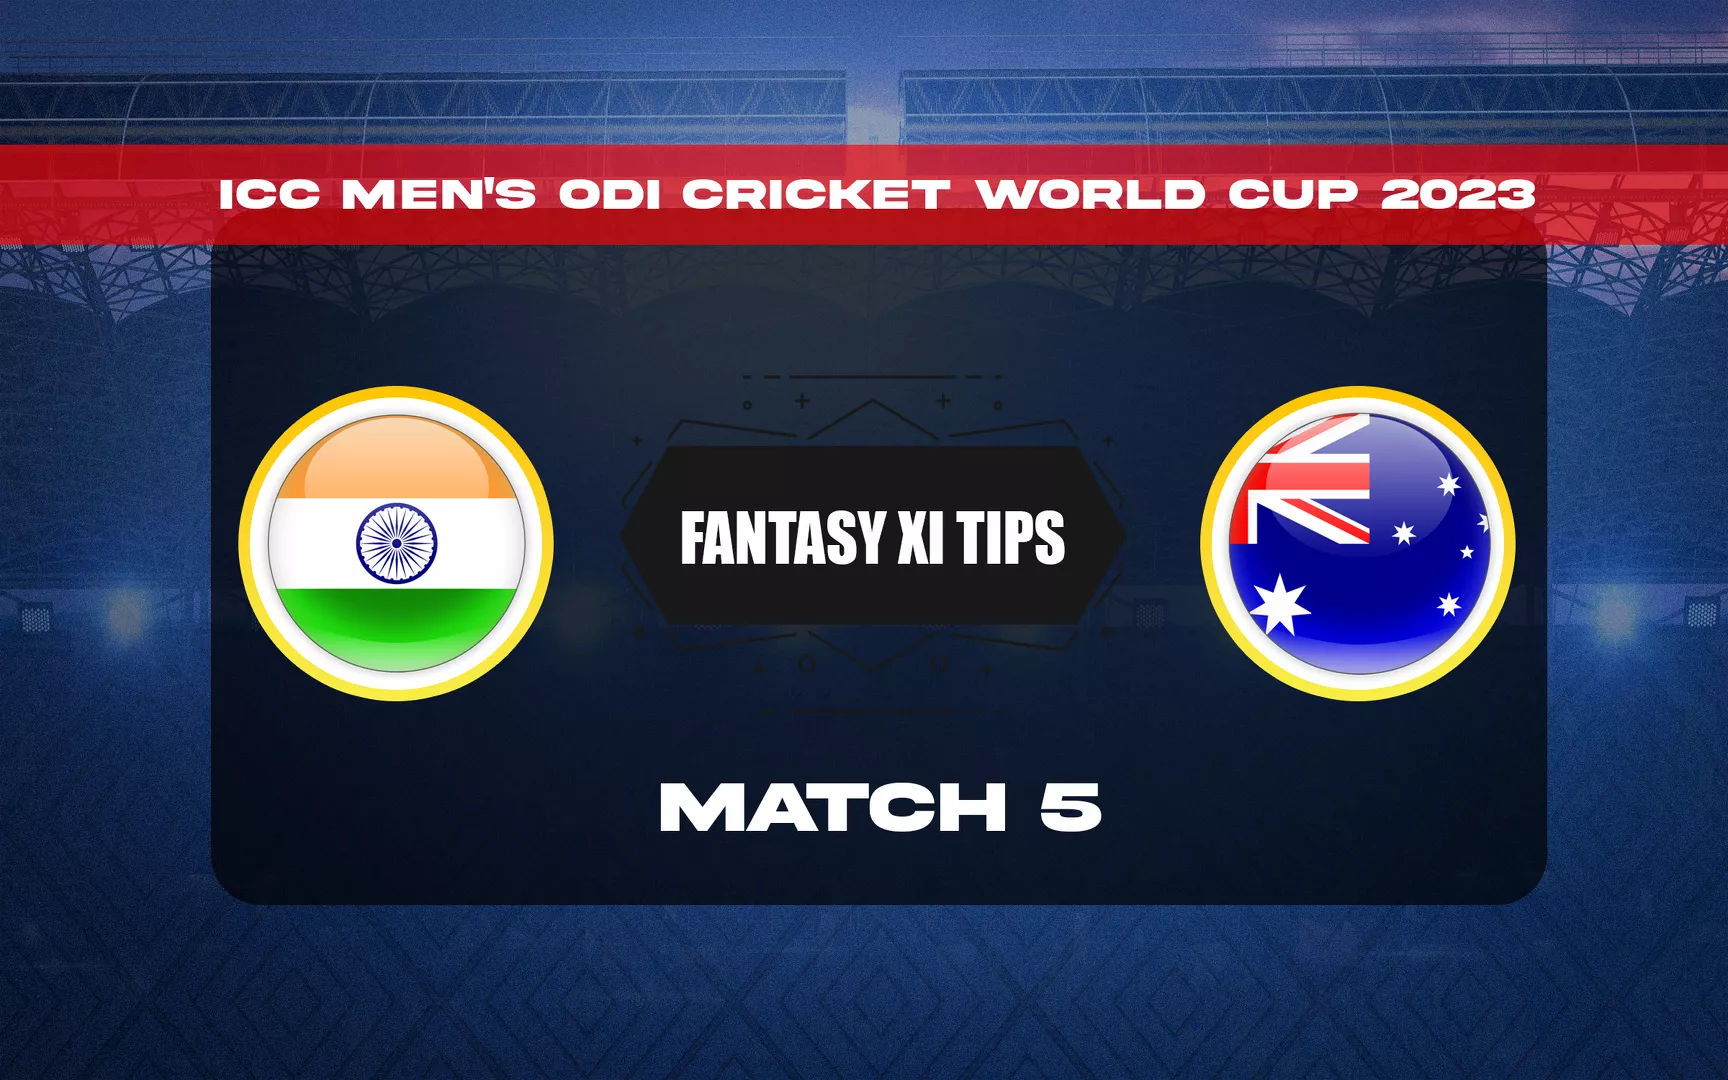 Ind Vs Aus Dream11 Prediction Dream11 Playing Xi Today Match 5 Icc Mens Odi Cricket World 3433